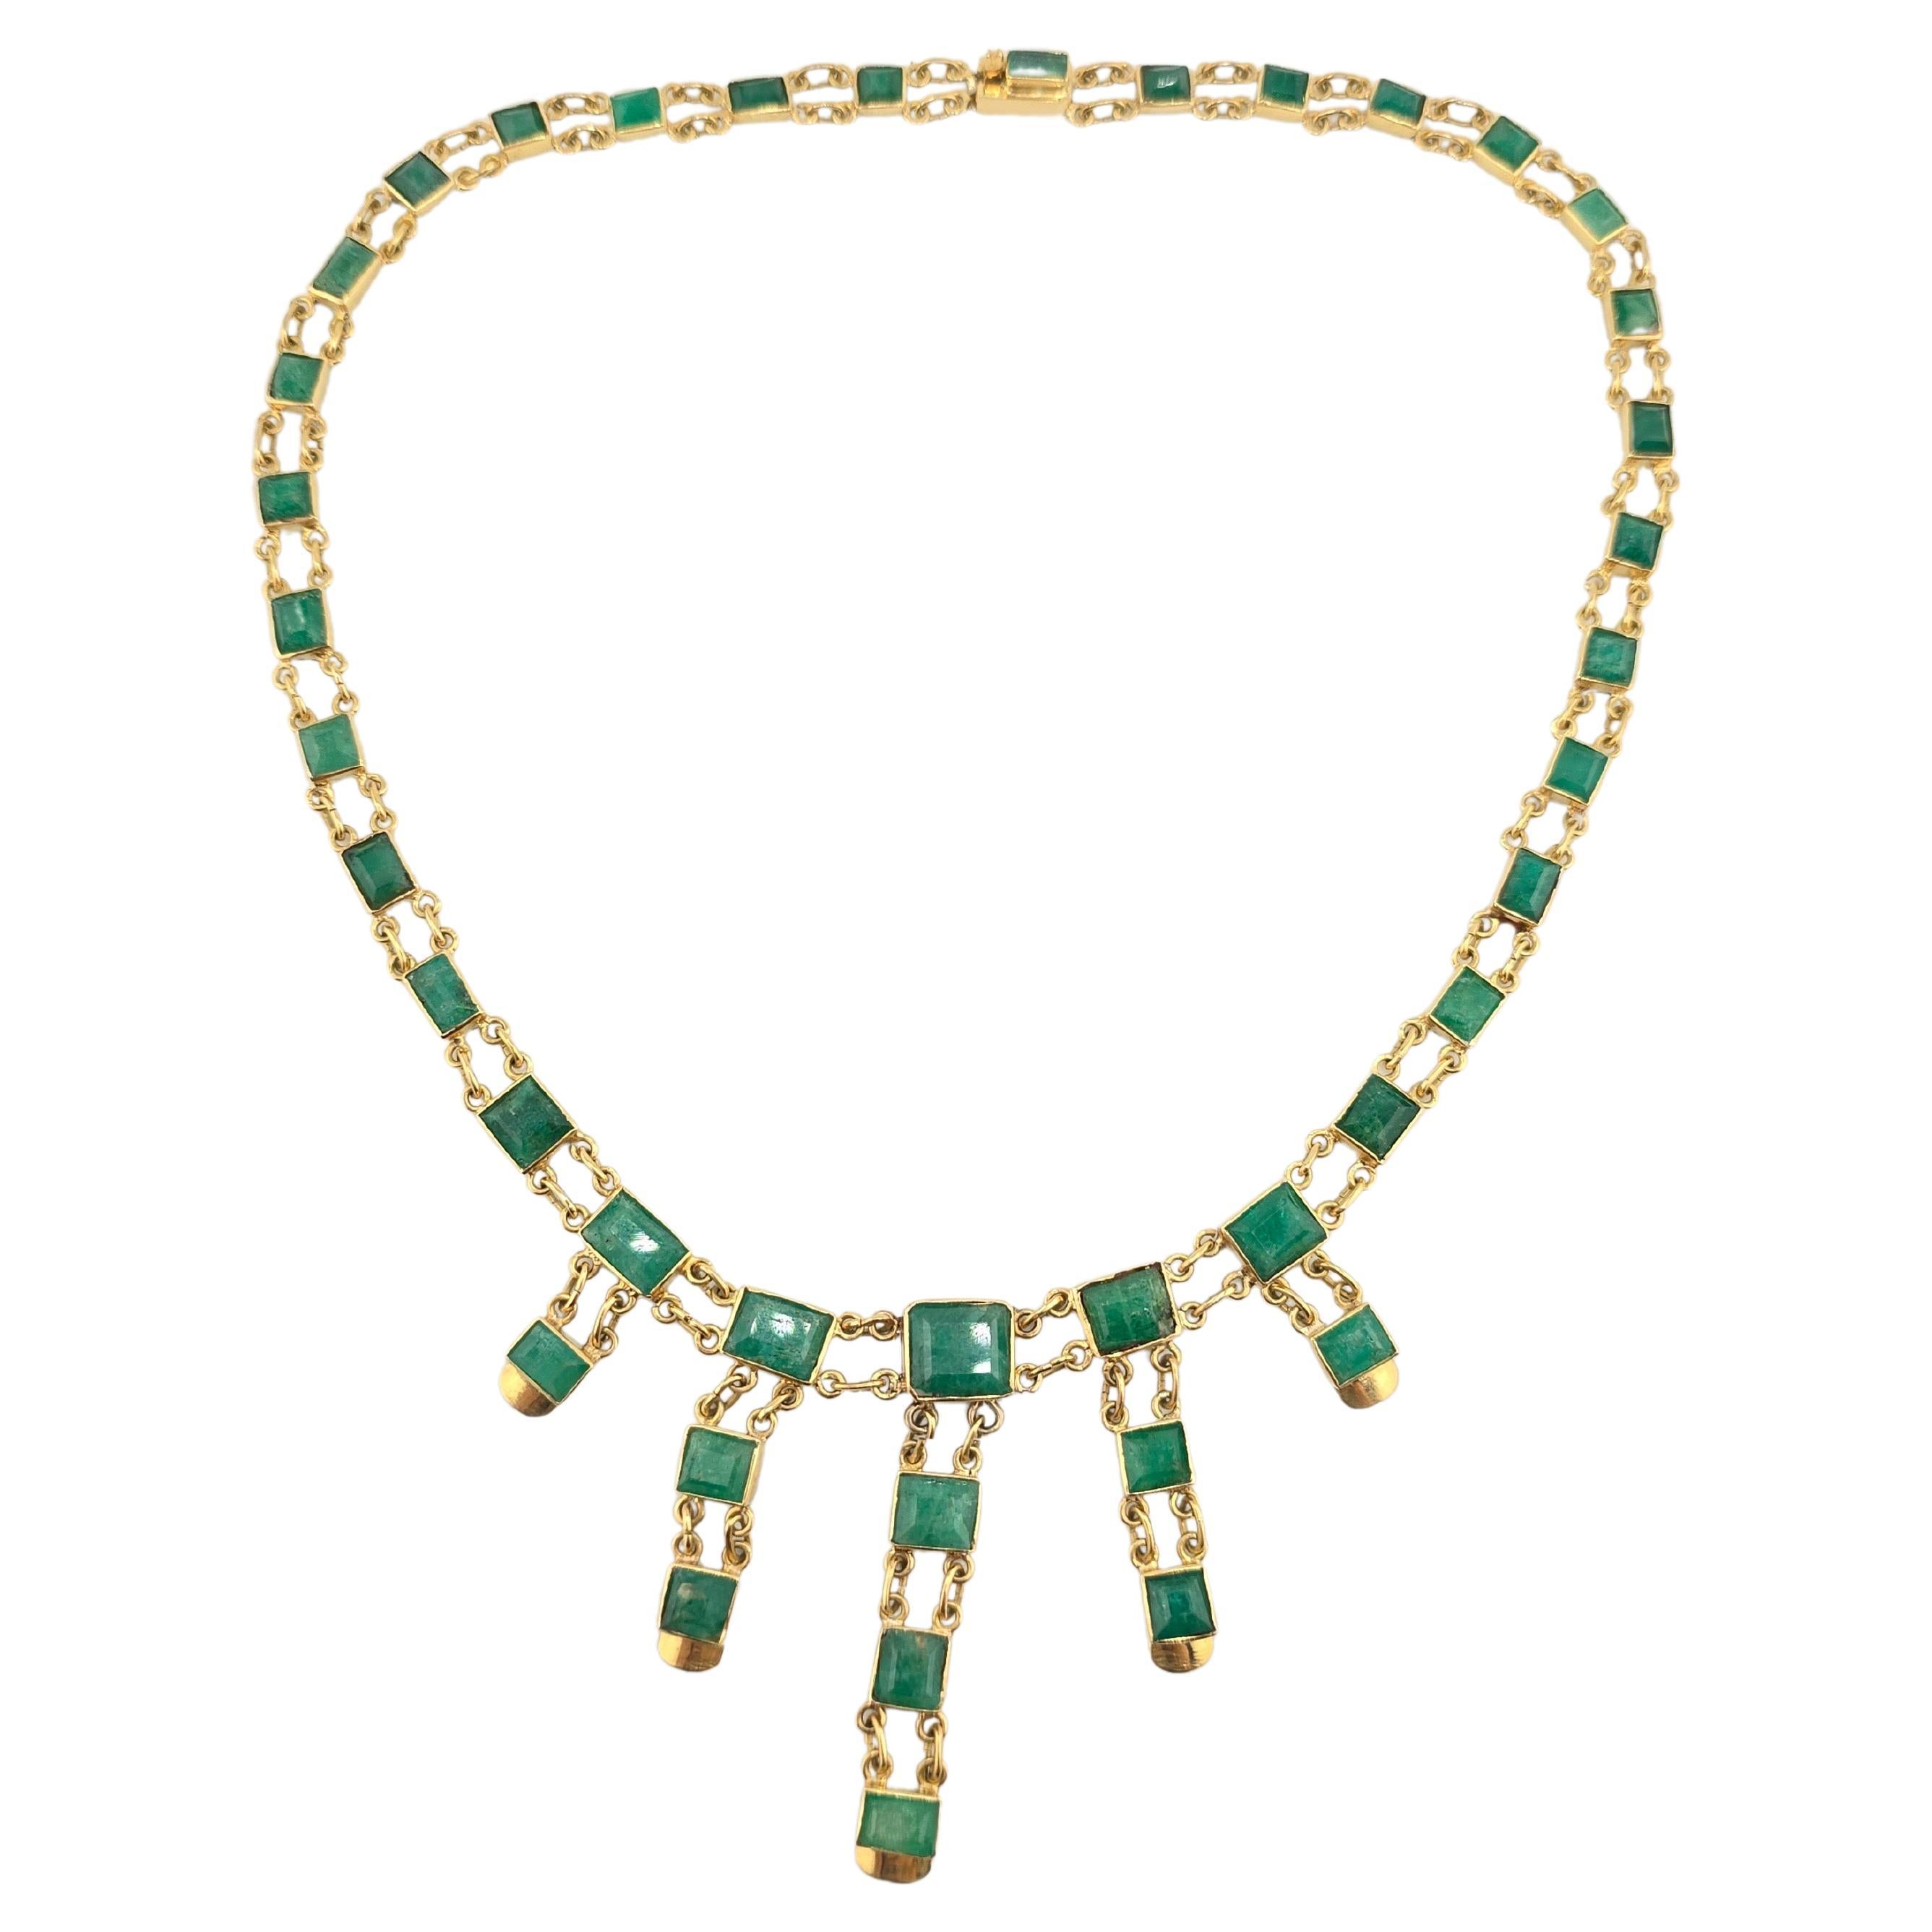 Majestic 14K Yellow Gold & Emerald Necklace 31.74 Grams For Sale